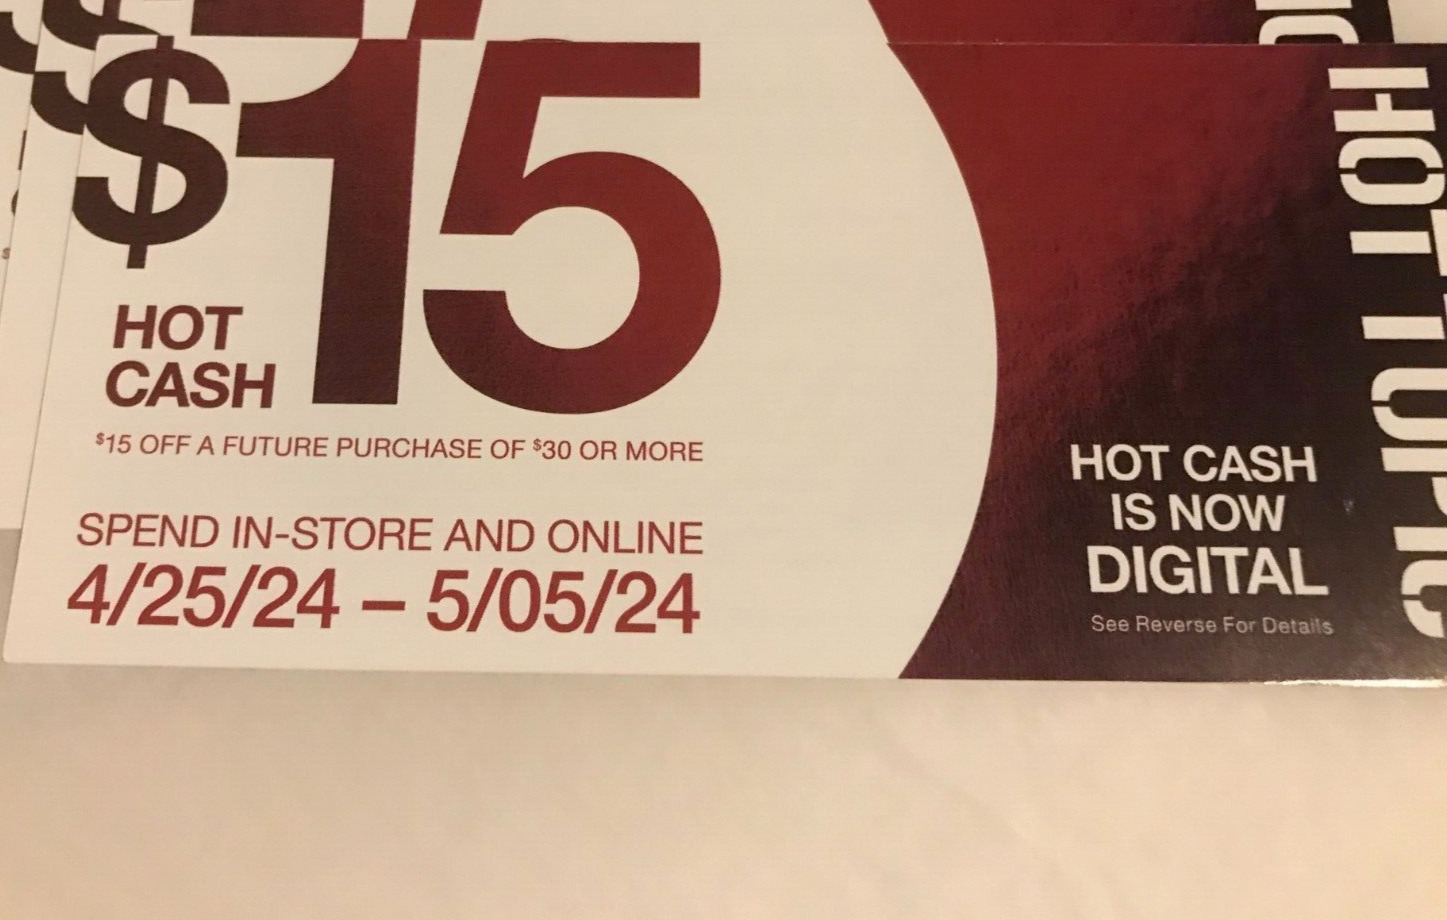 1 Hot Topic Hot Cash $15 off $30 coupon codes valid from 04/25/24 to 05/05/24